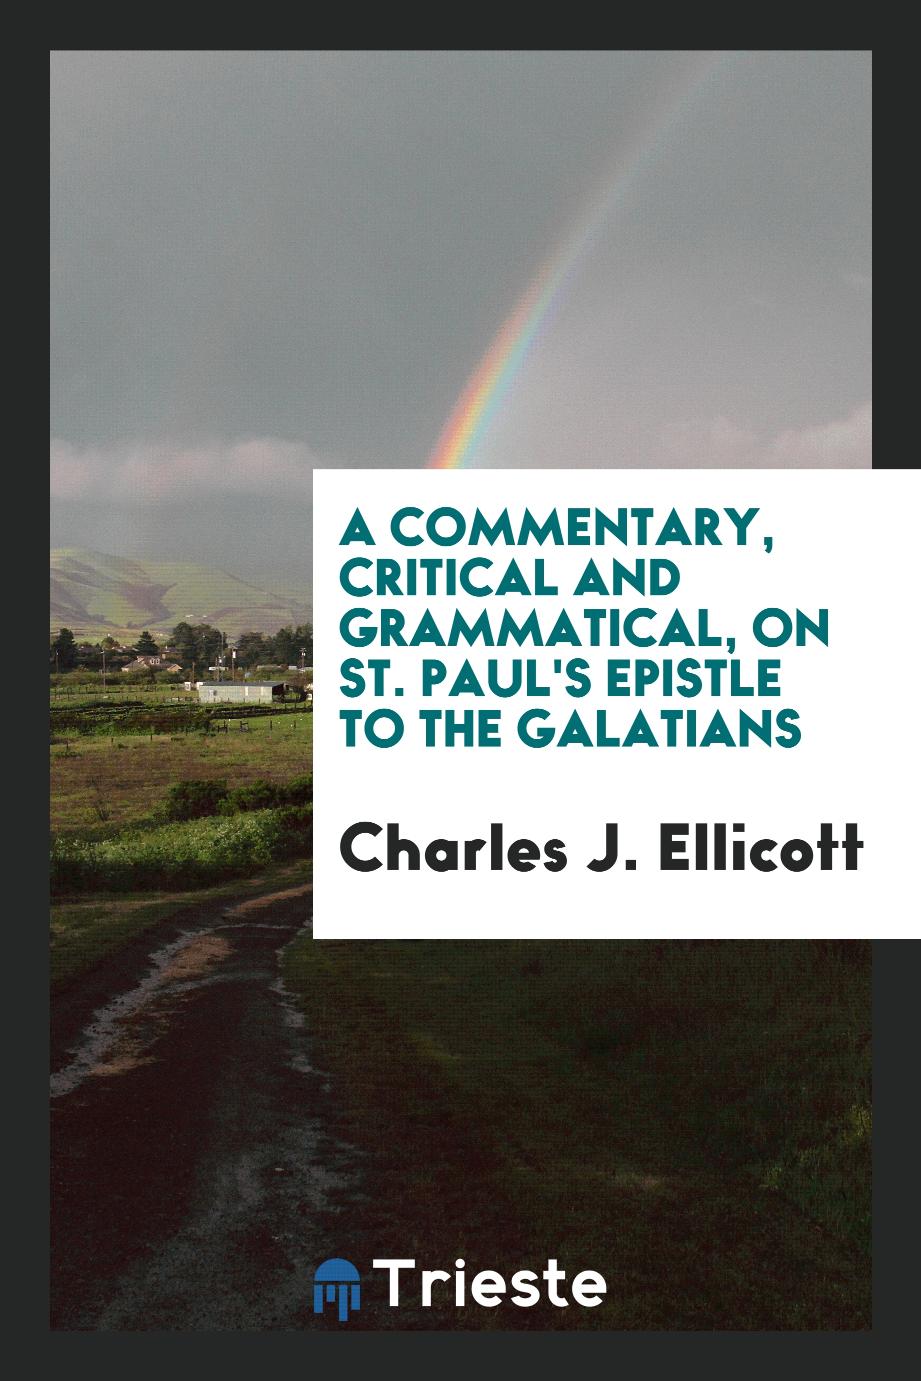 A Commentary, Critical and Grammatical, on St. Paul's Epistle to the Galatians